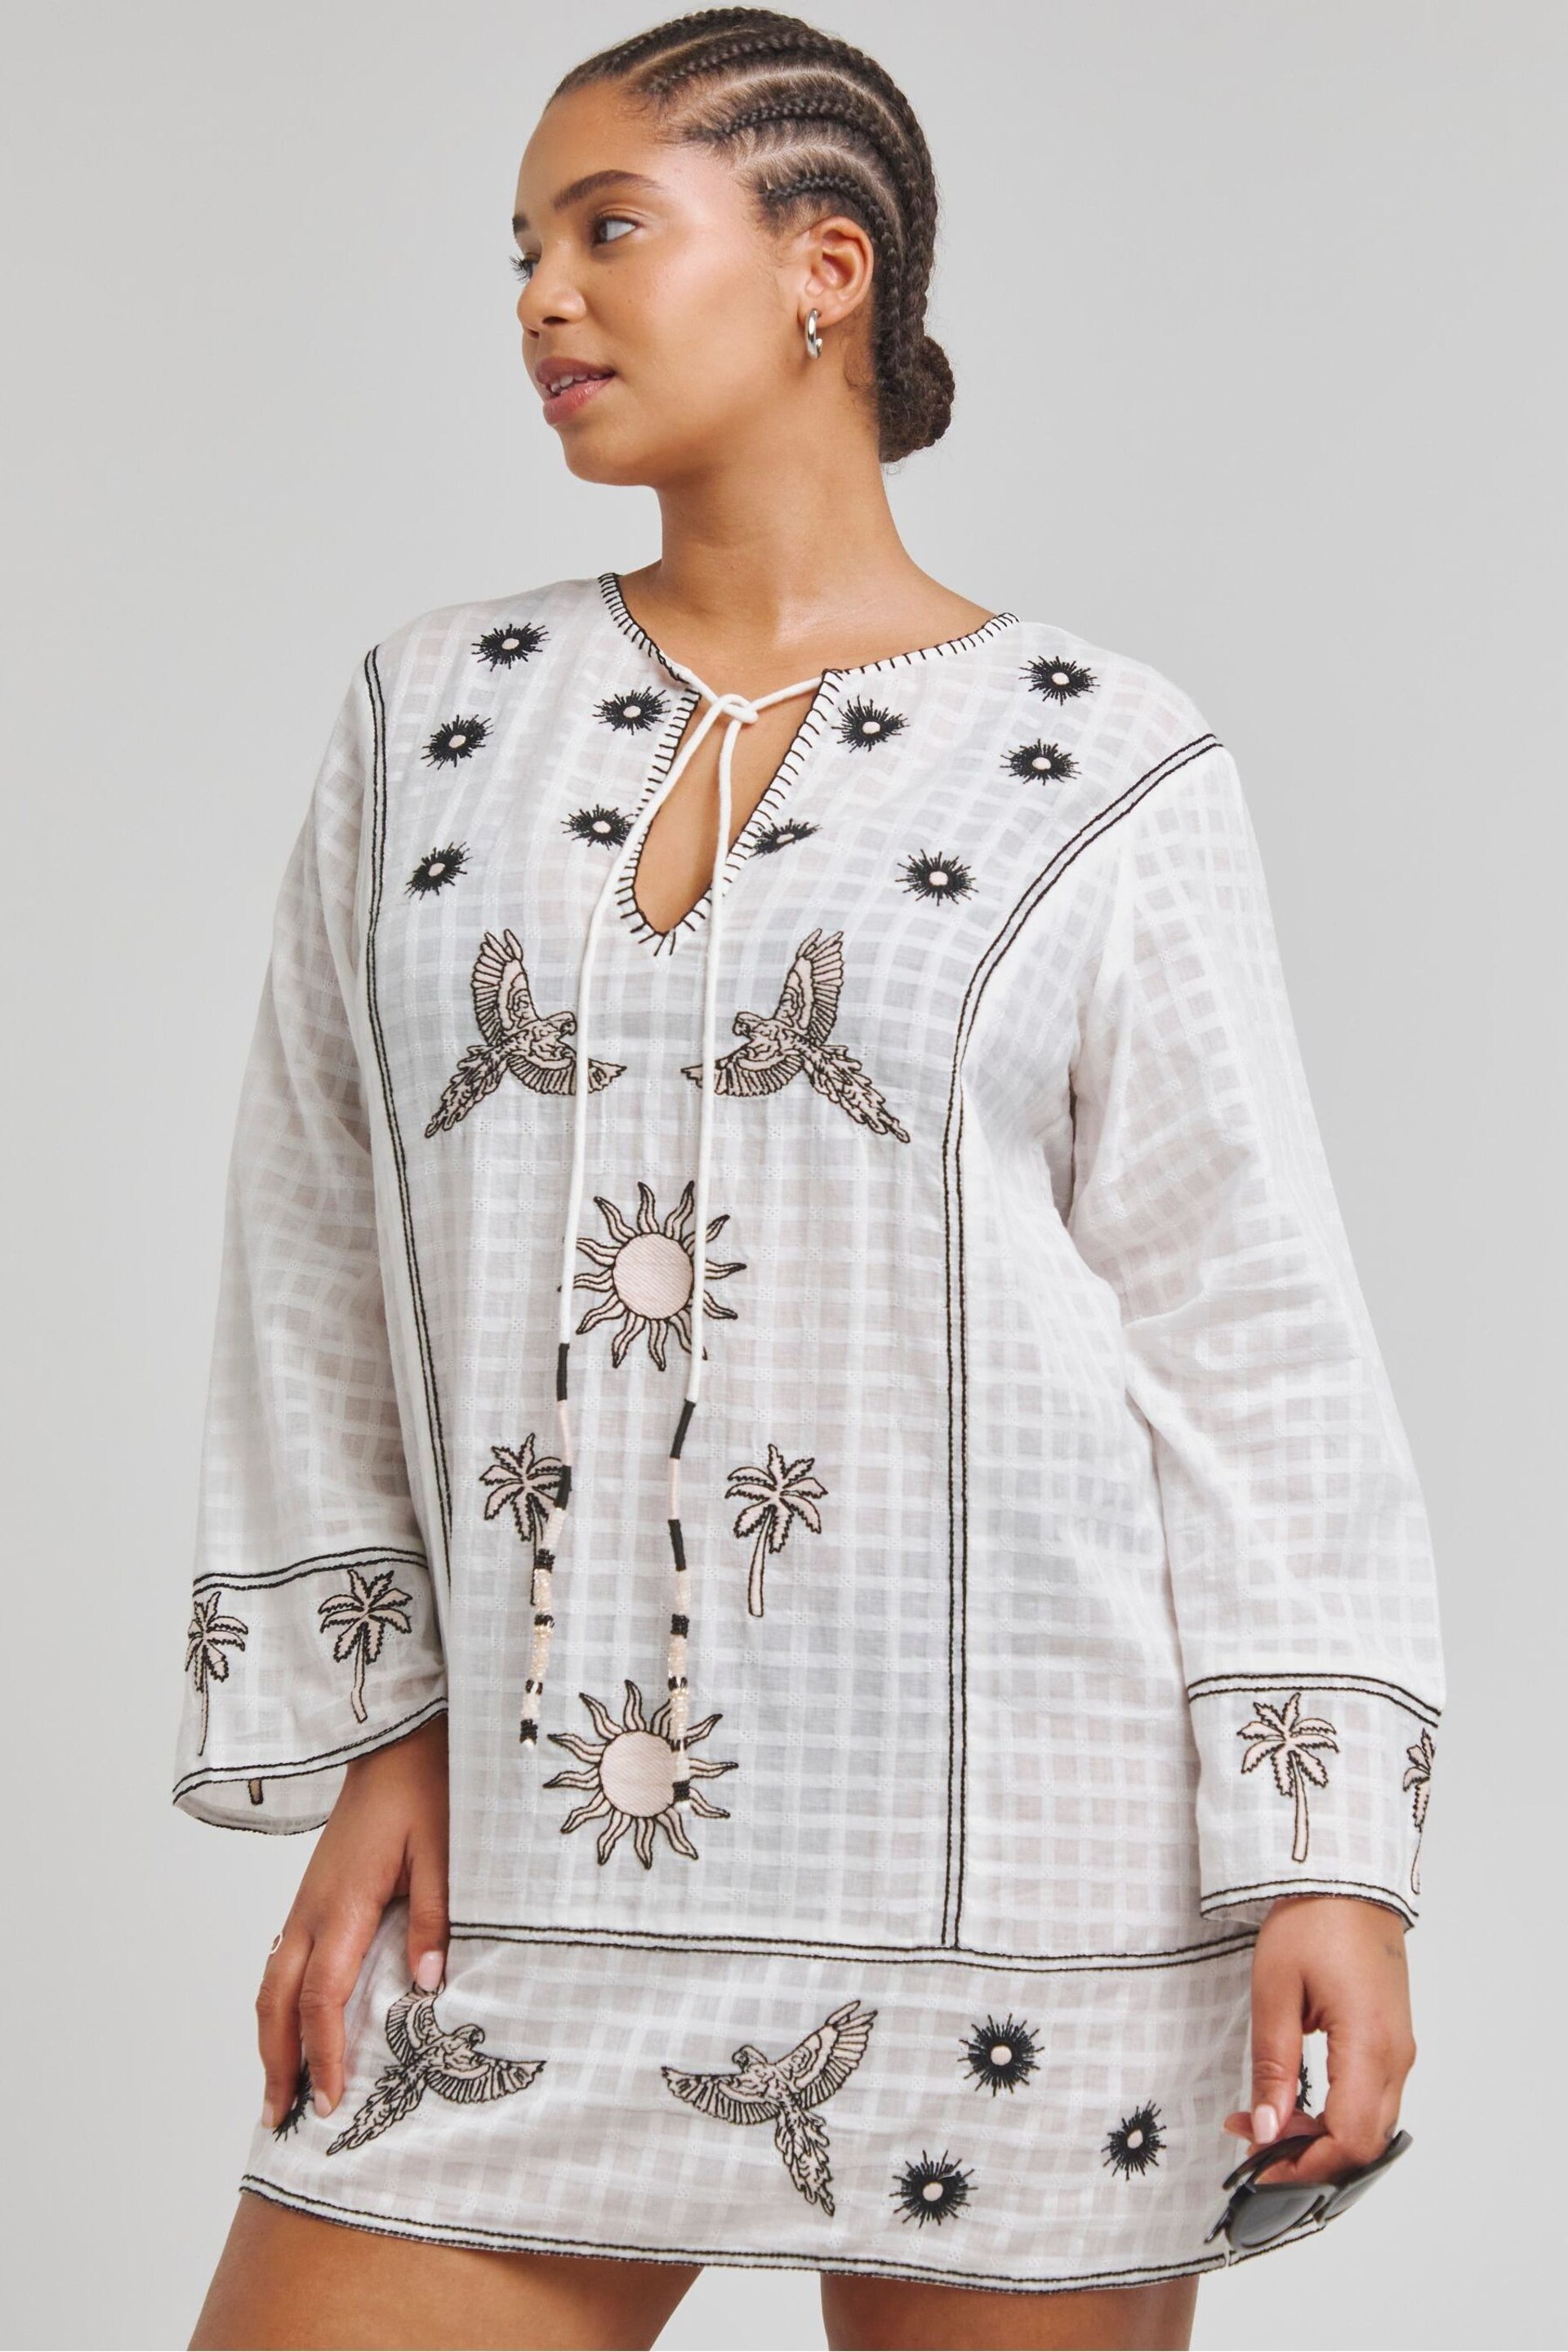 Figleaves Mystical Craft Embroidered White Kaftan - Image 1 of 4